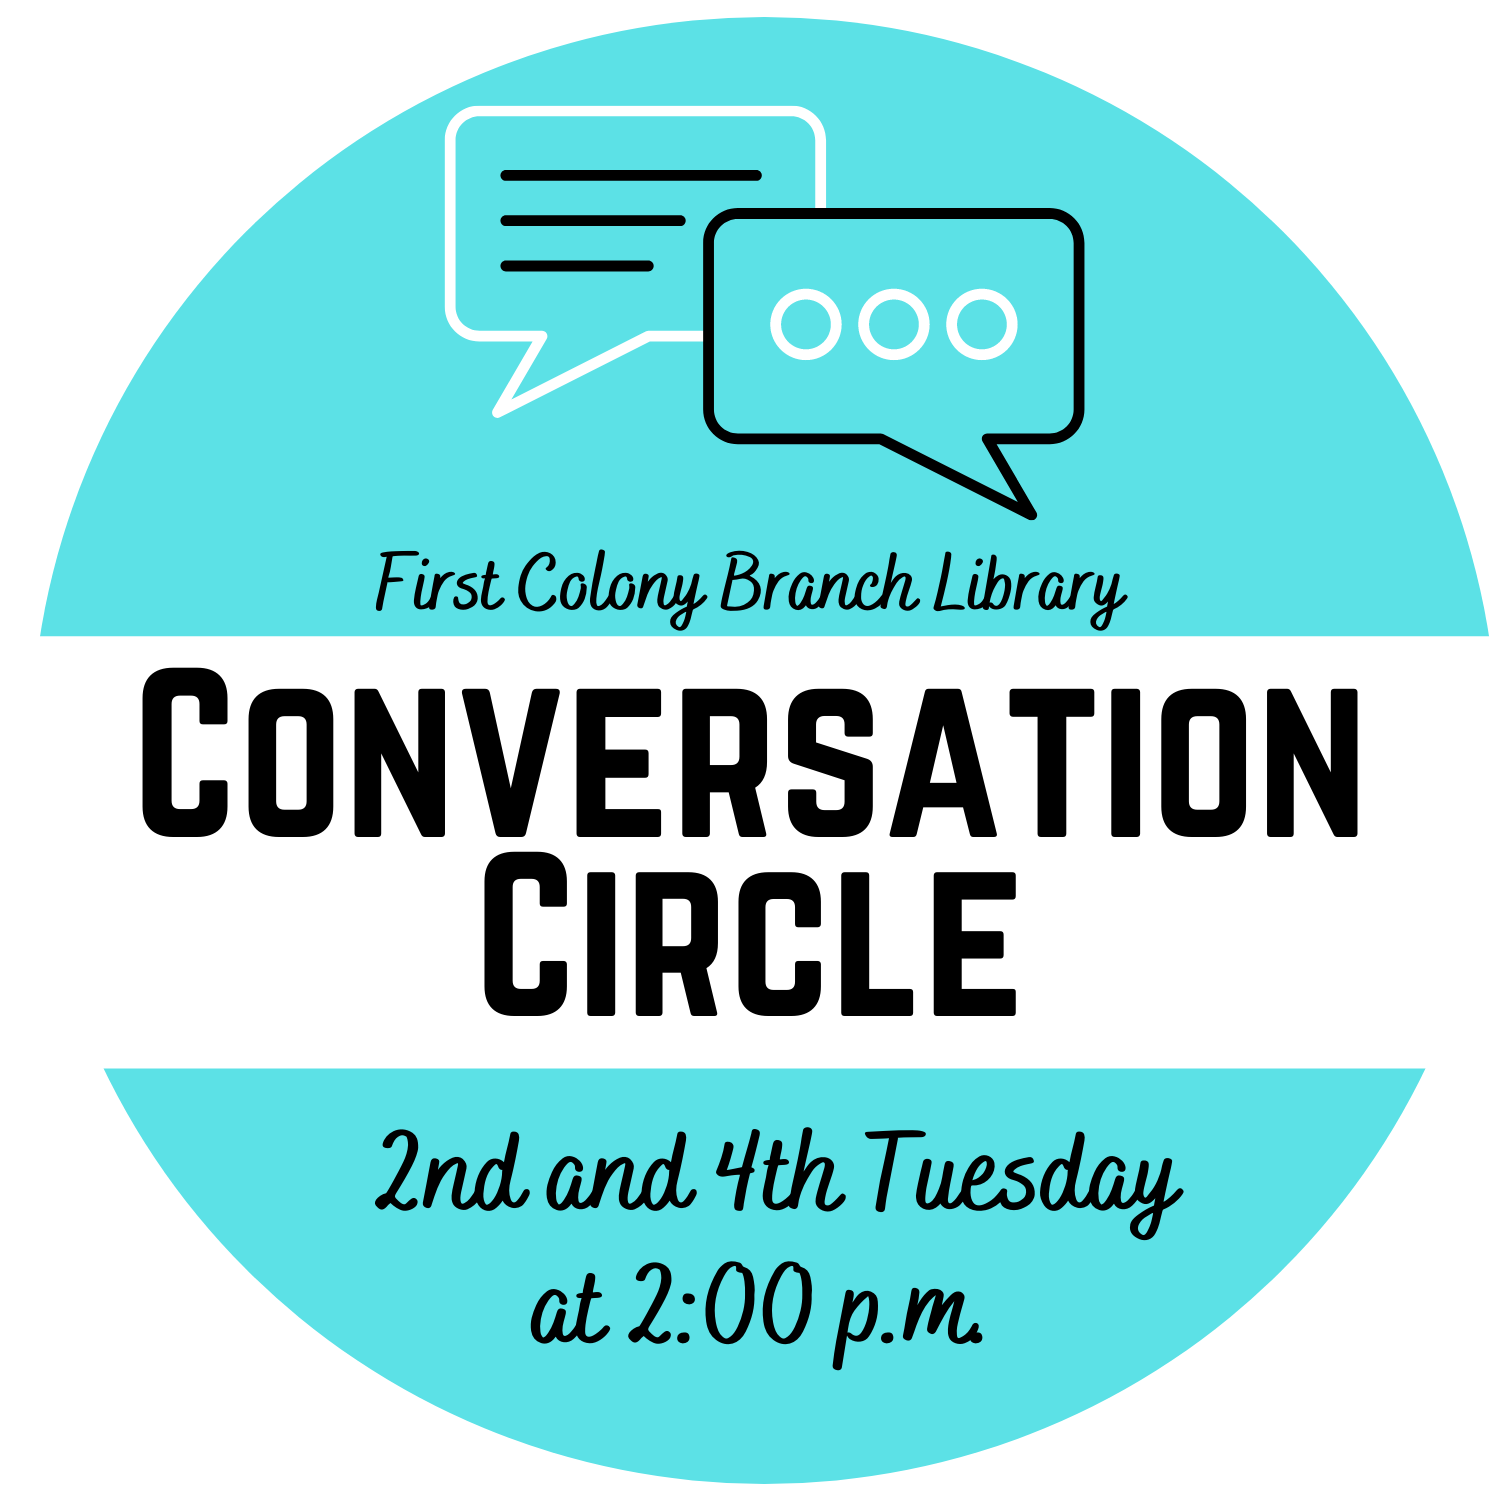 speech bubbles and text saying Conversation Circle 2nd and 4th Tuesdays at 2pm